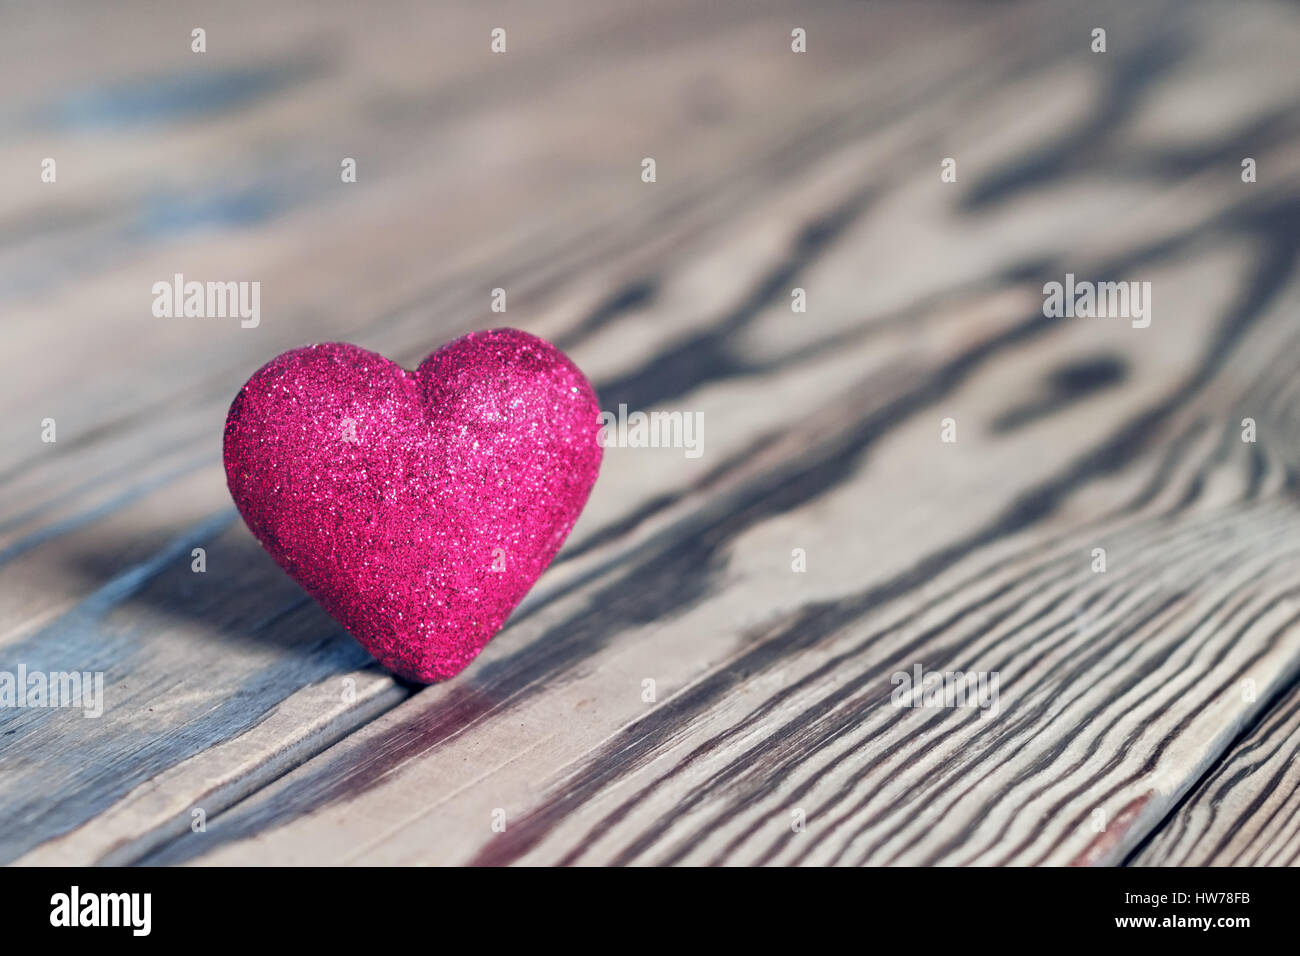 Red heart with glitter on wood. St. Valentine's Day. Shallow DOF, soft focus. Stock Photo